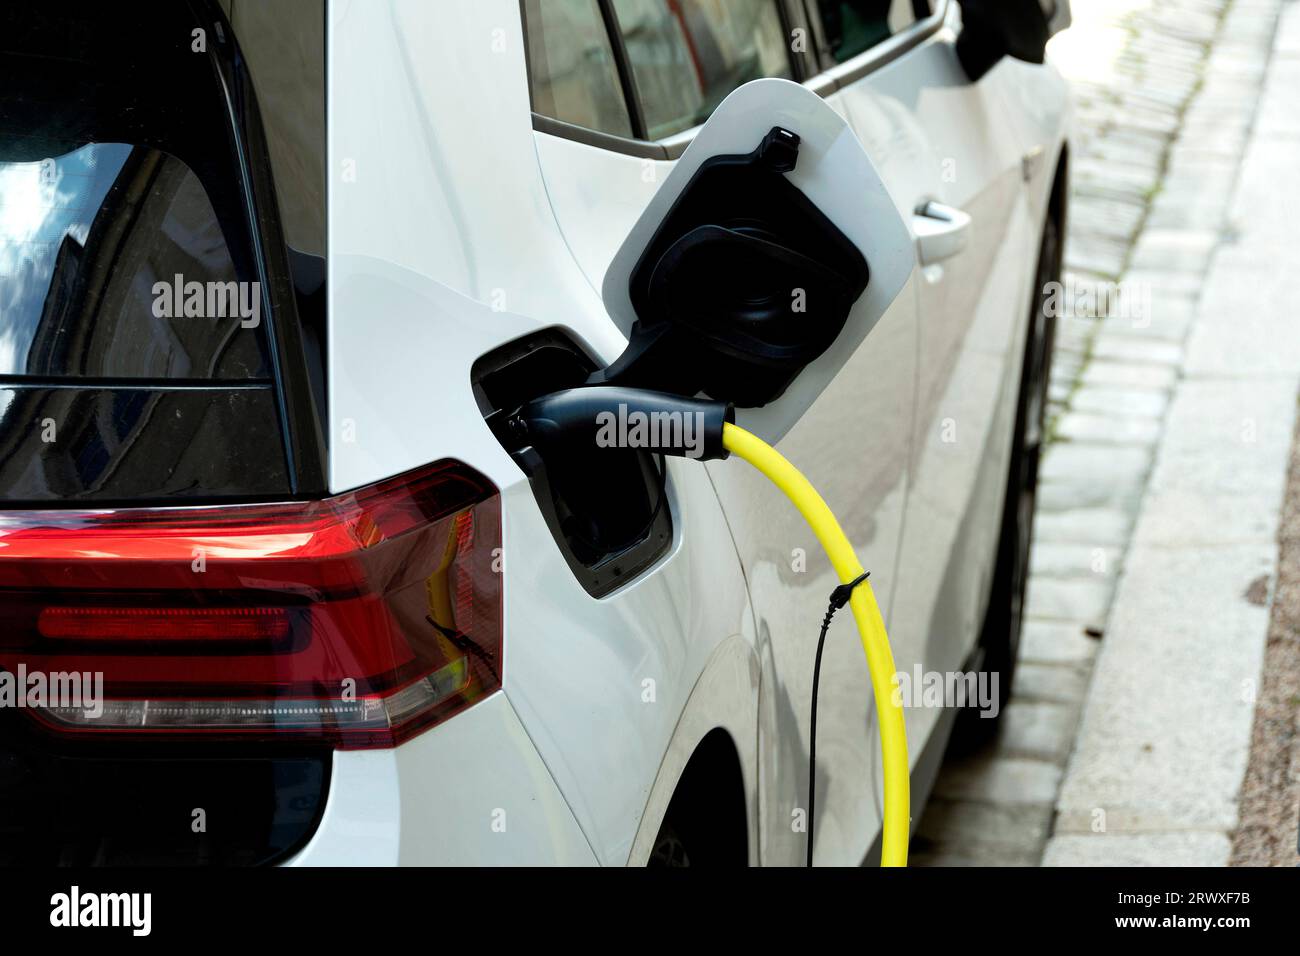 Electric car at public charging point. France Stock Photo